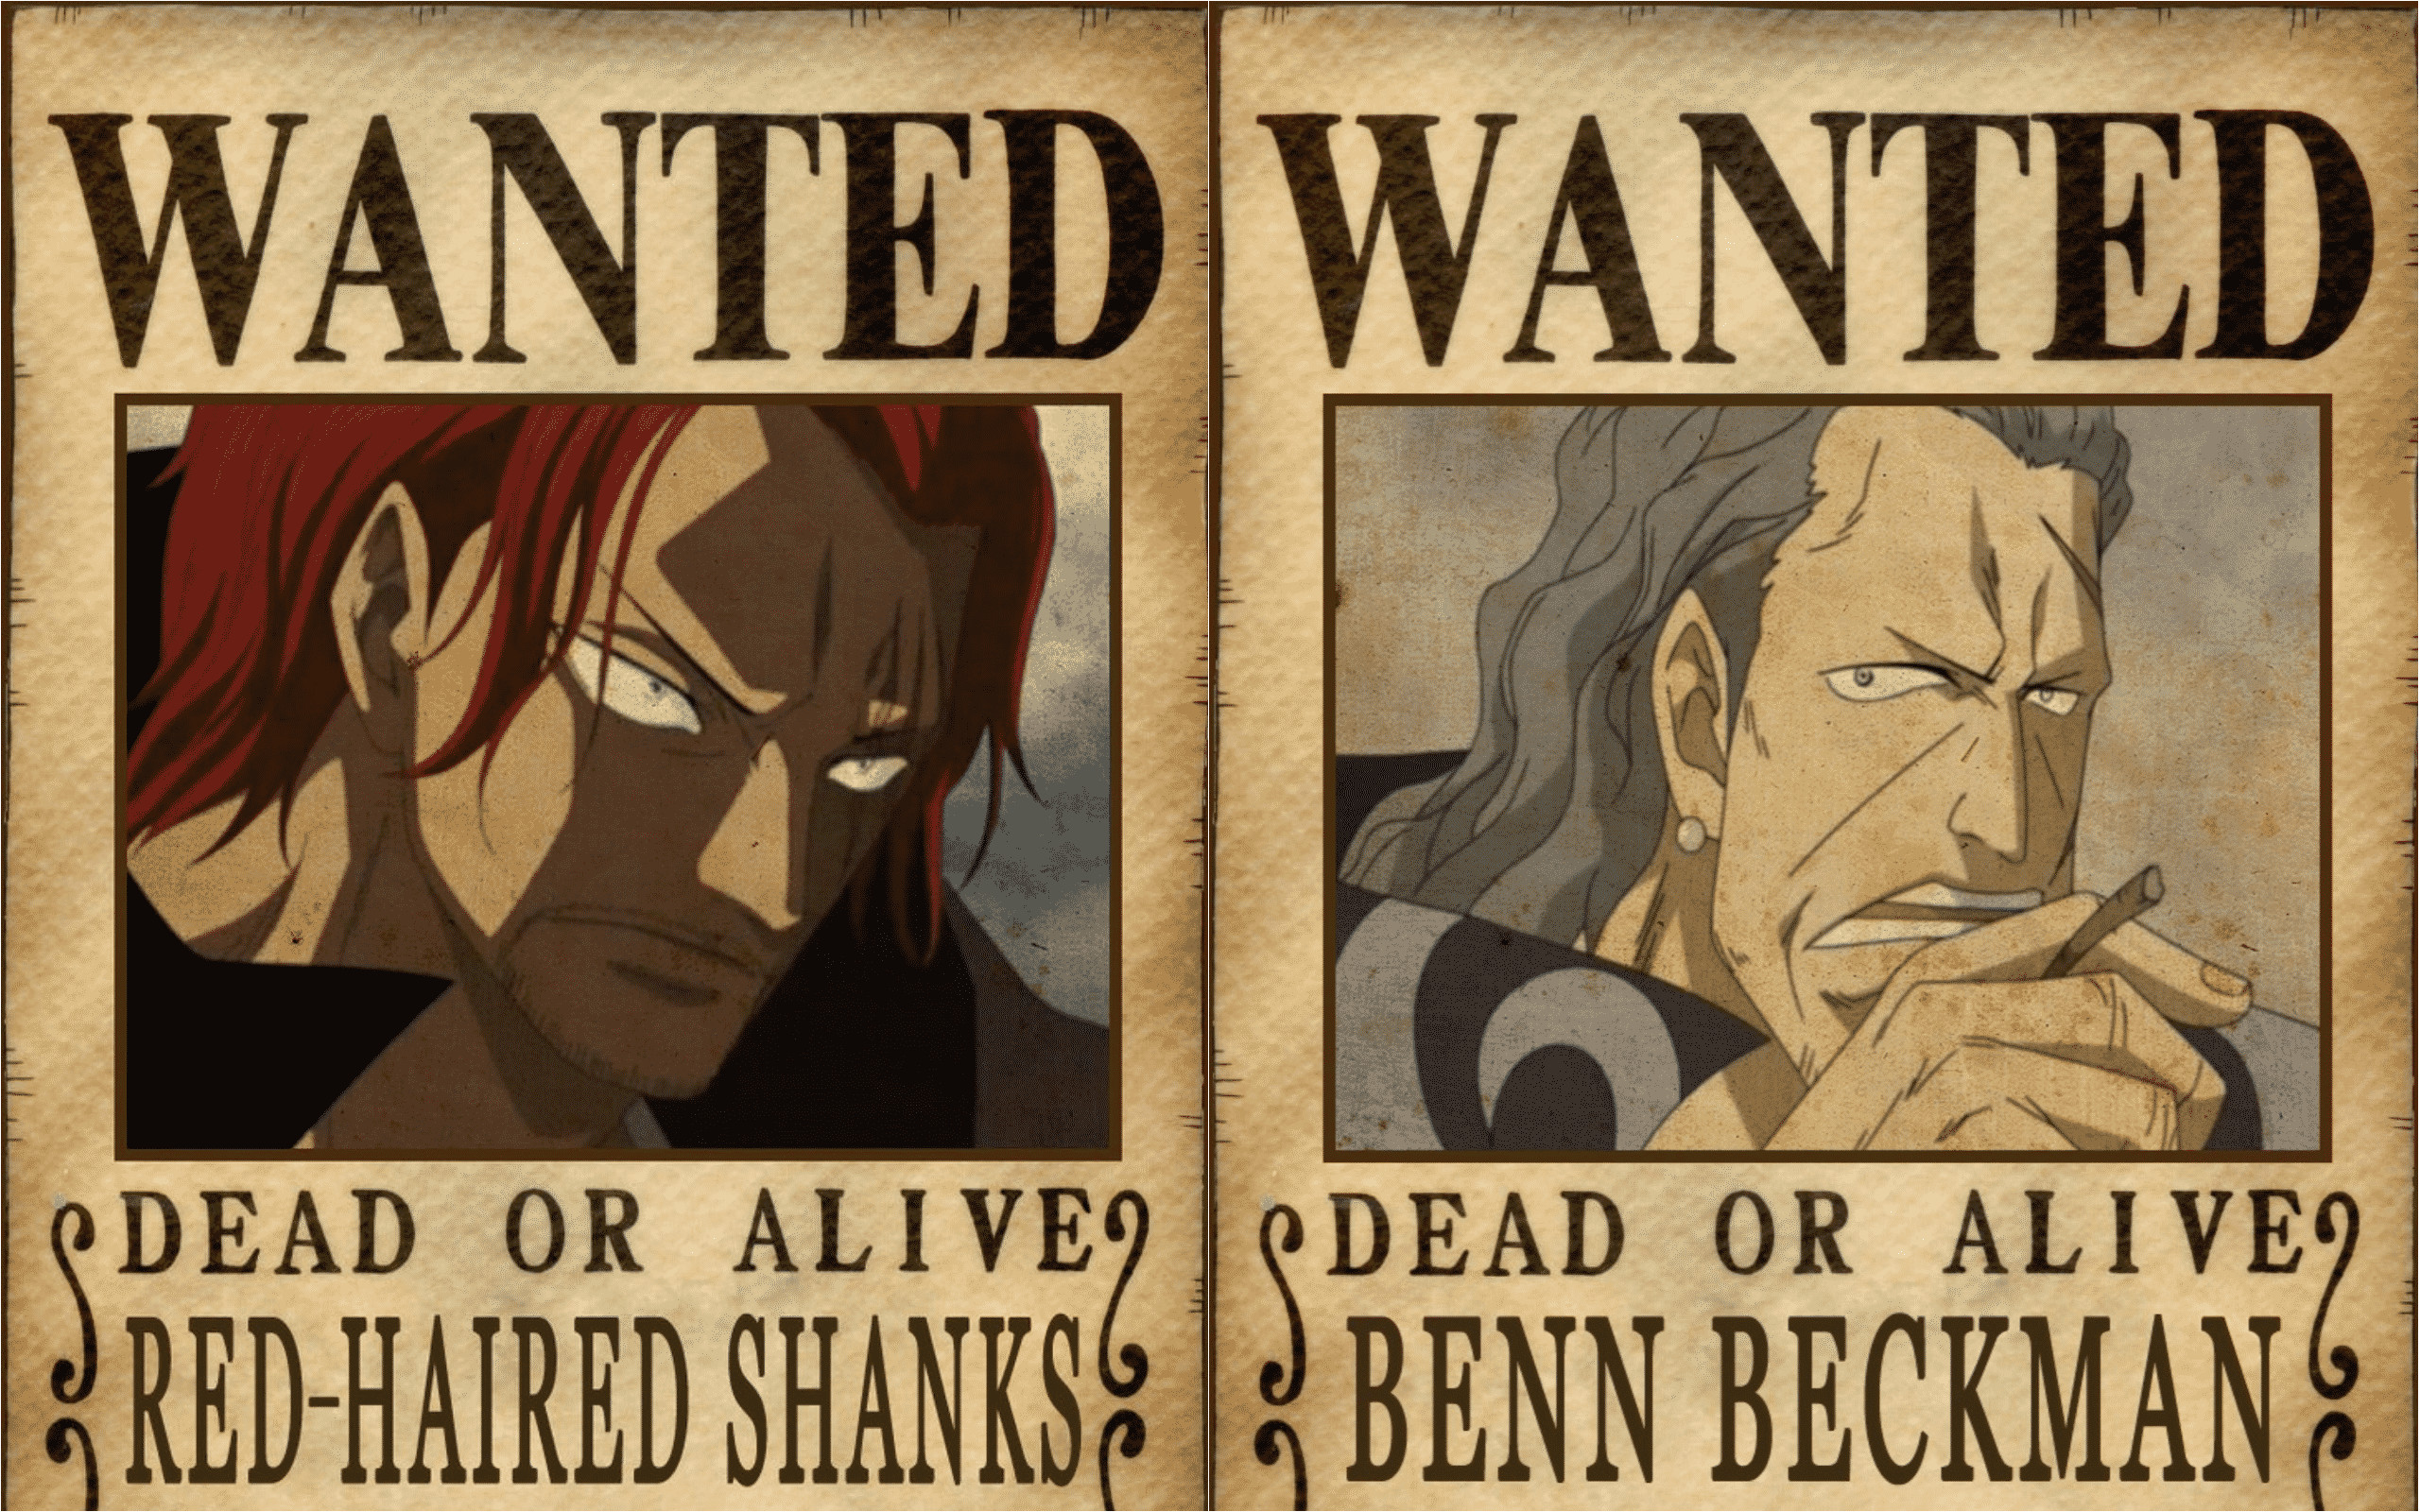 2560x1600, One Piece Shanks Crew Wallpapers Full Hd - One Piece Wanted Poster Shanks - HD Wallpaper 